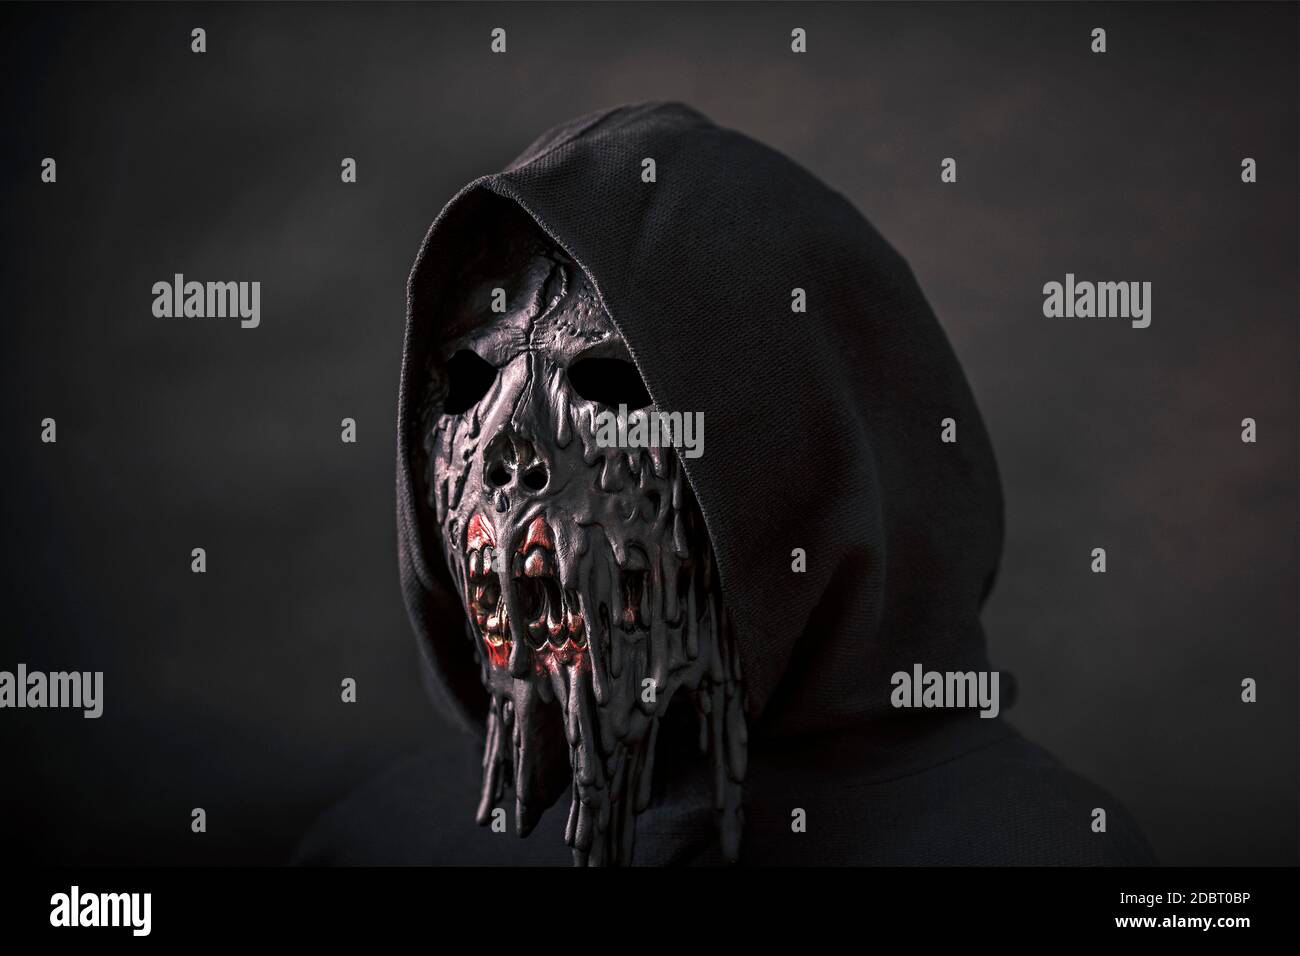 Scary figure in hooded cloak with mask Stock Photo